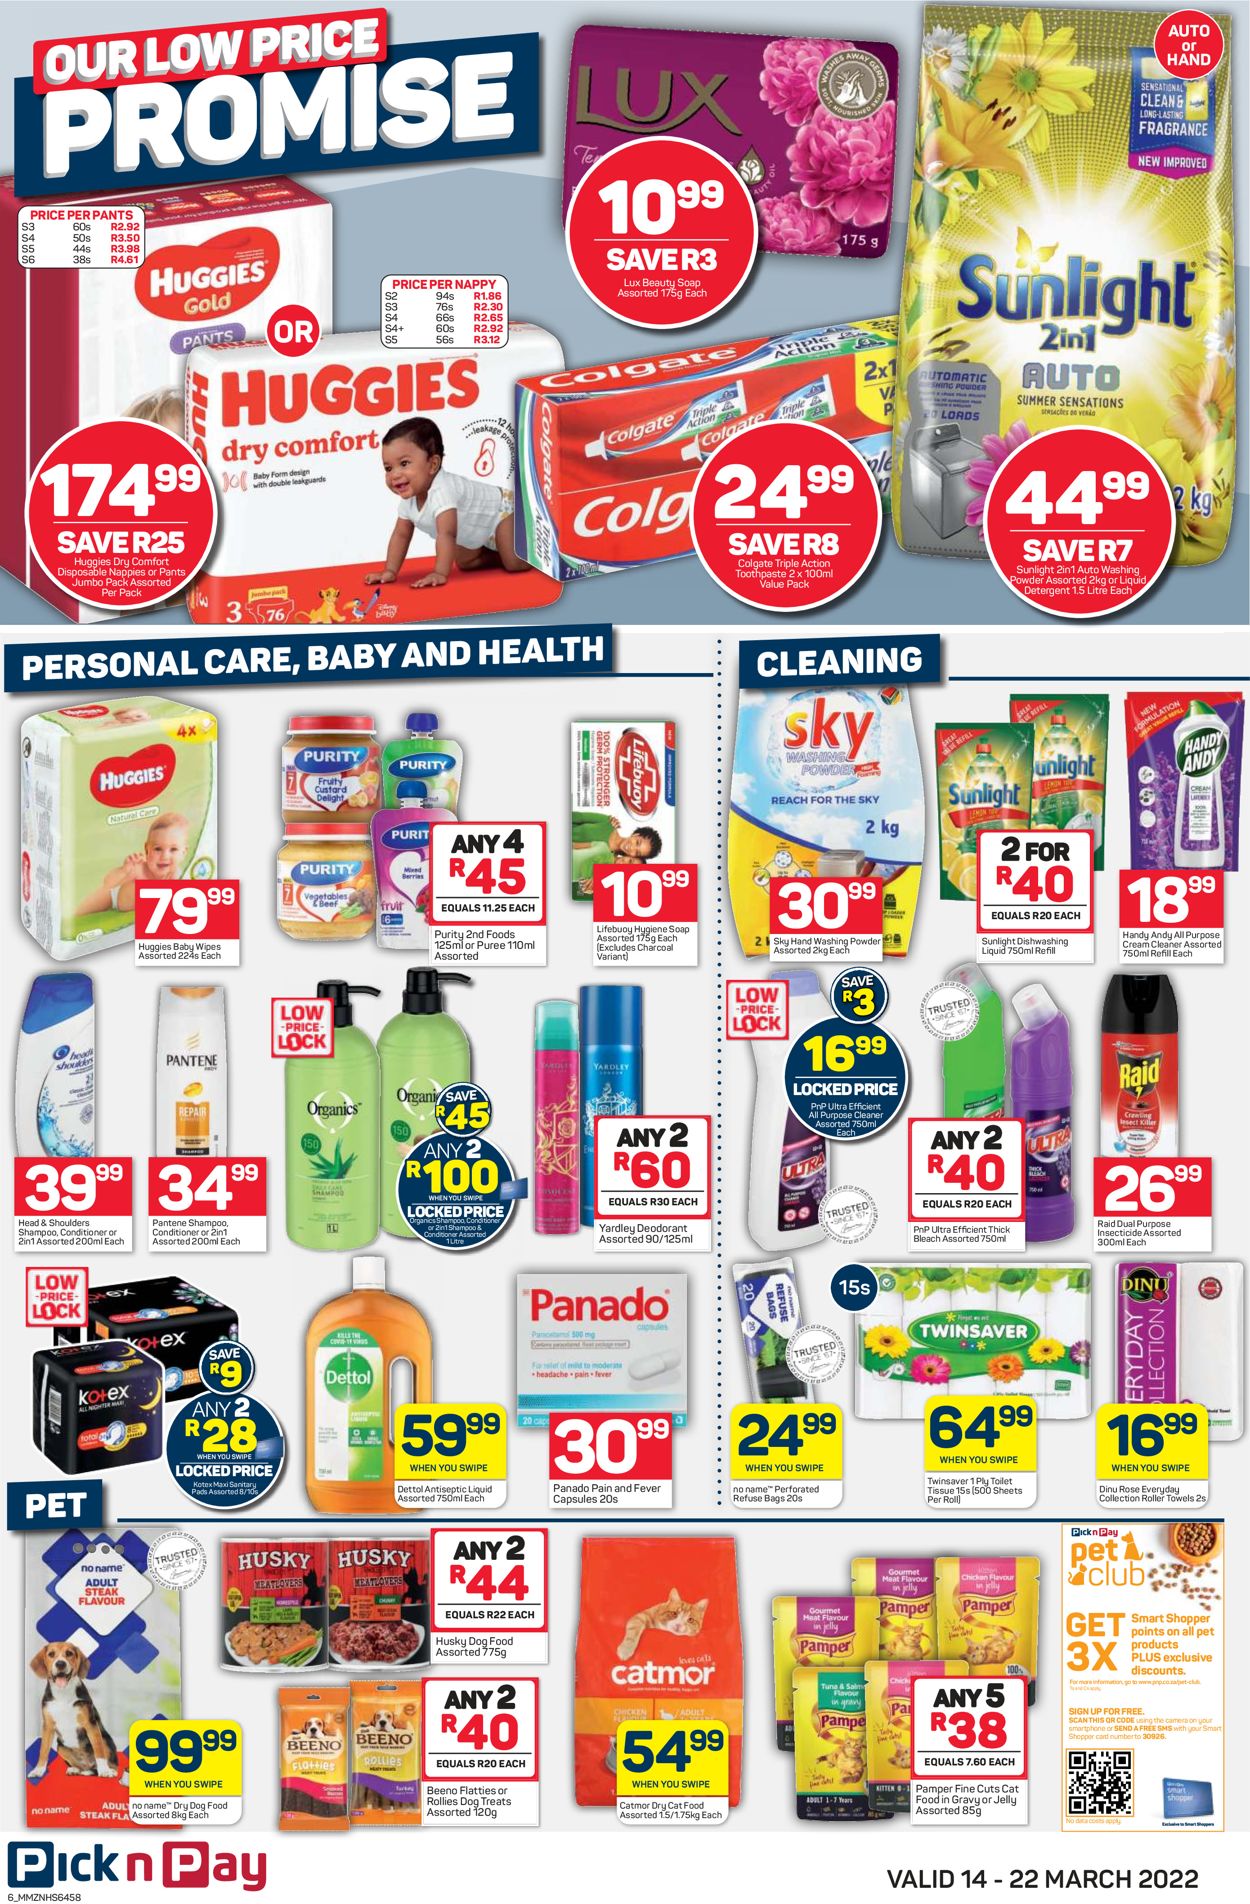 Pick n Pay Catalogue - 2022/03/14-2022/03/22 (Page 6)